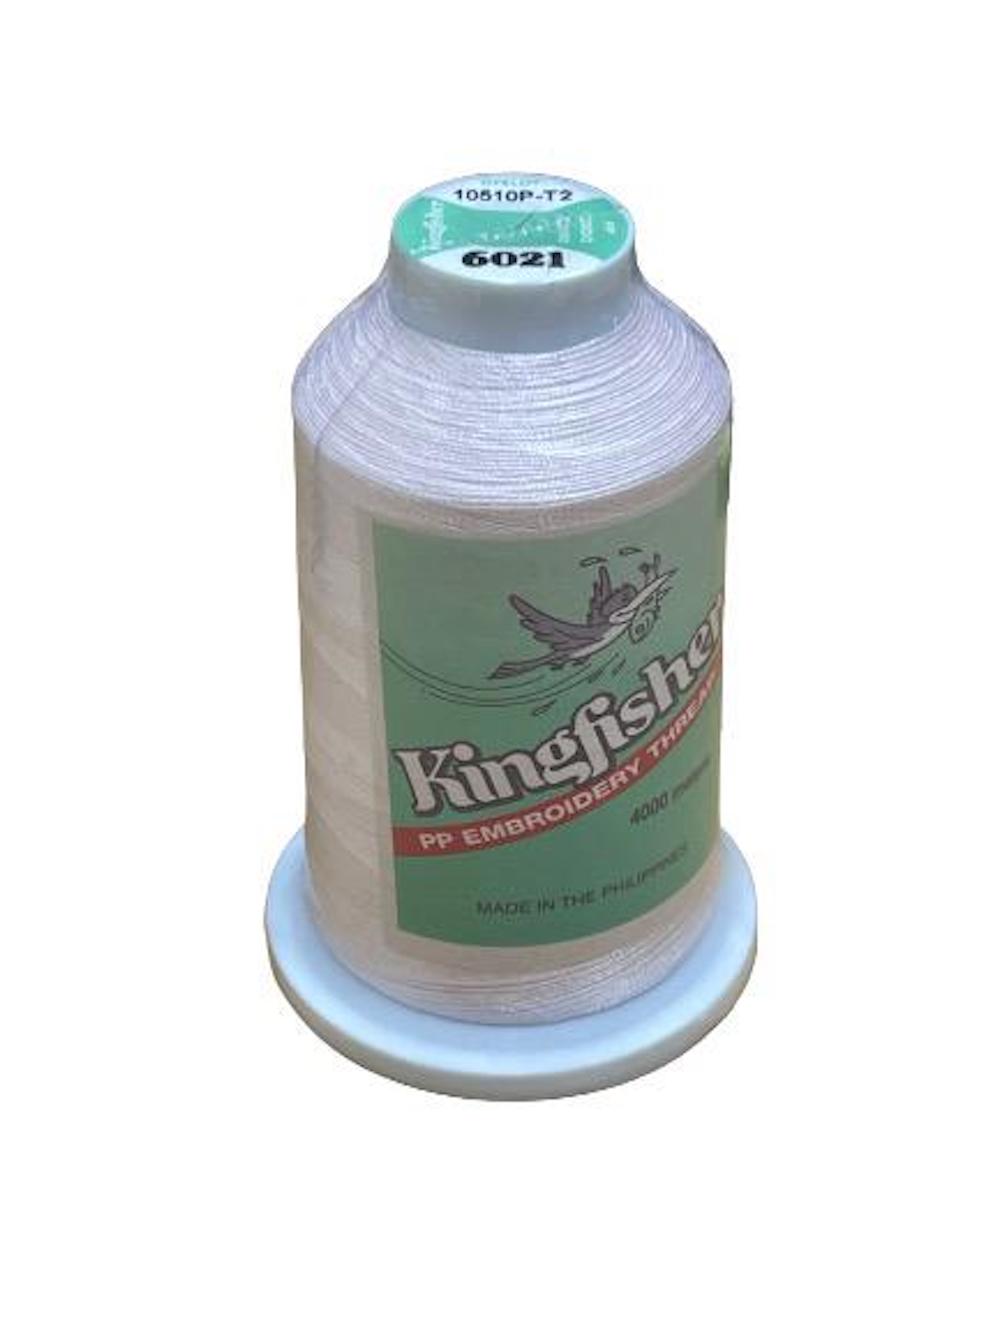 King Fisher Embroidery Thread 4000m 6021 - MY SEWING MALL